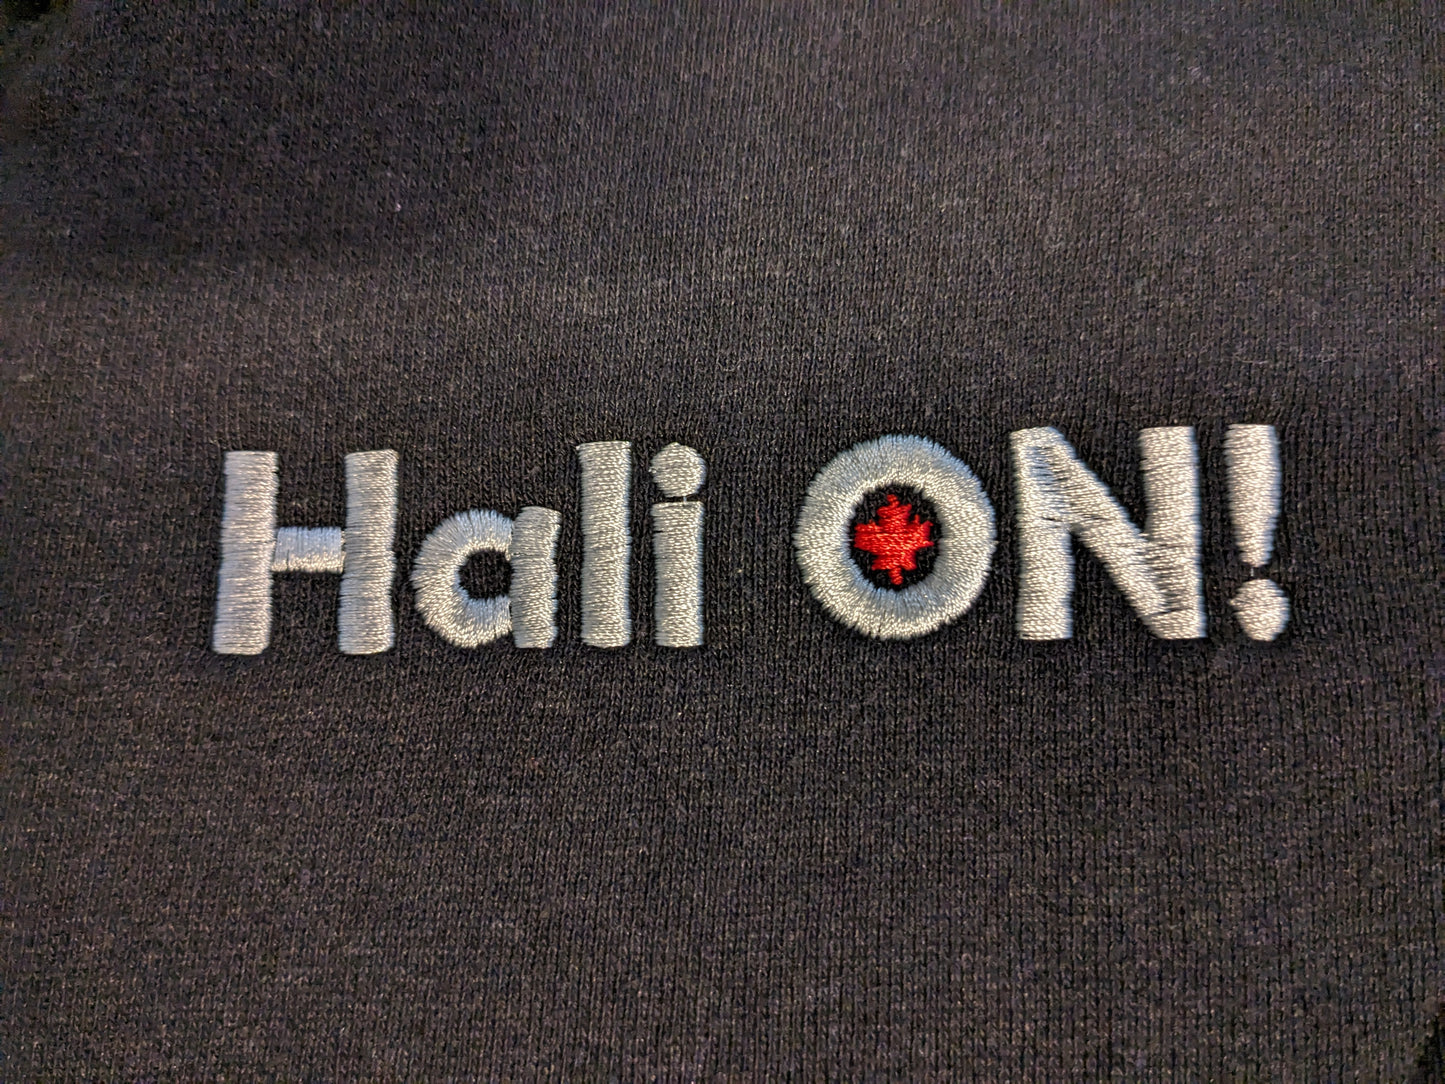 HALI ON! Hemp Fleece Track Jacket- Men's sizing (this is a close up of the HALI ON! embroidery in light grey with red maple leaf inside the 'O')